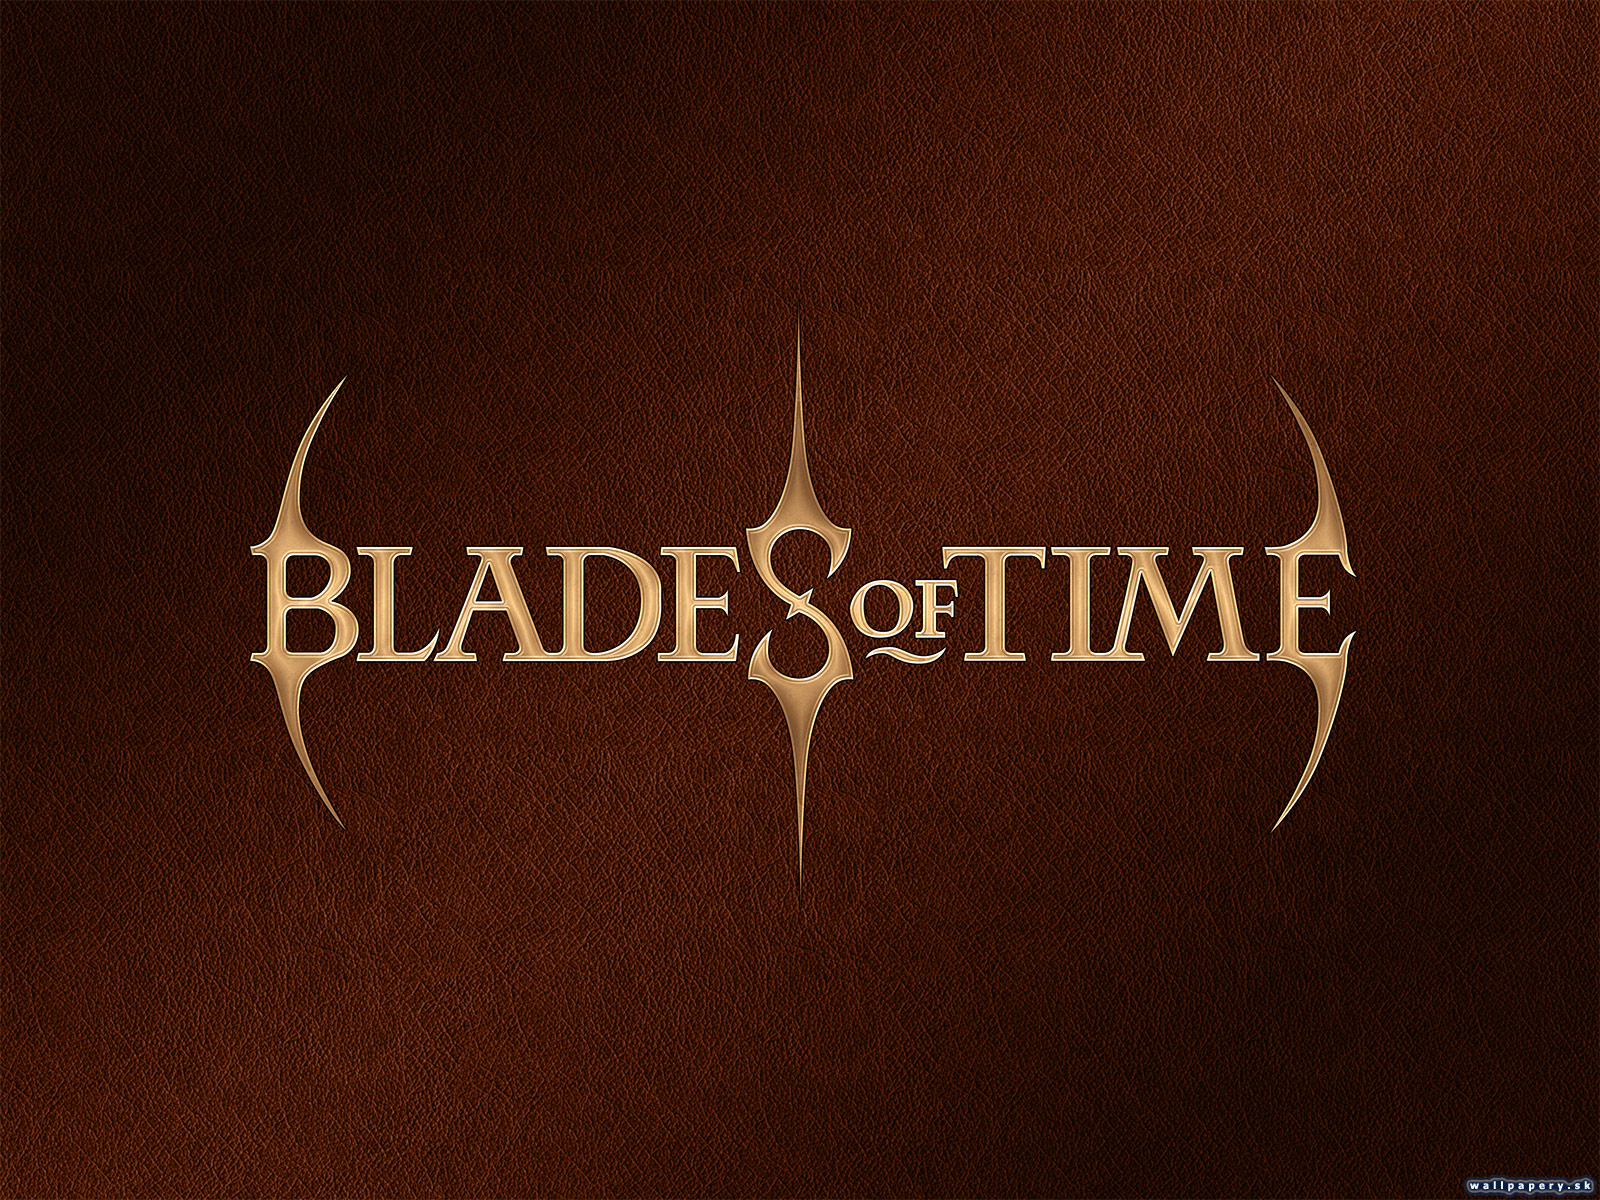 Blades of Time - wallpaper 5